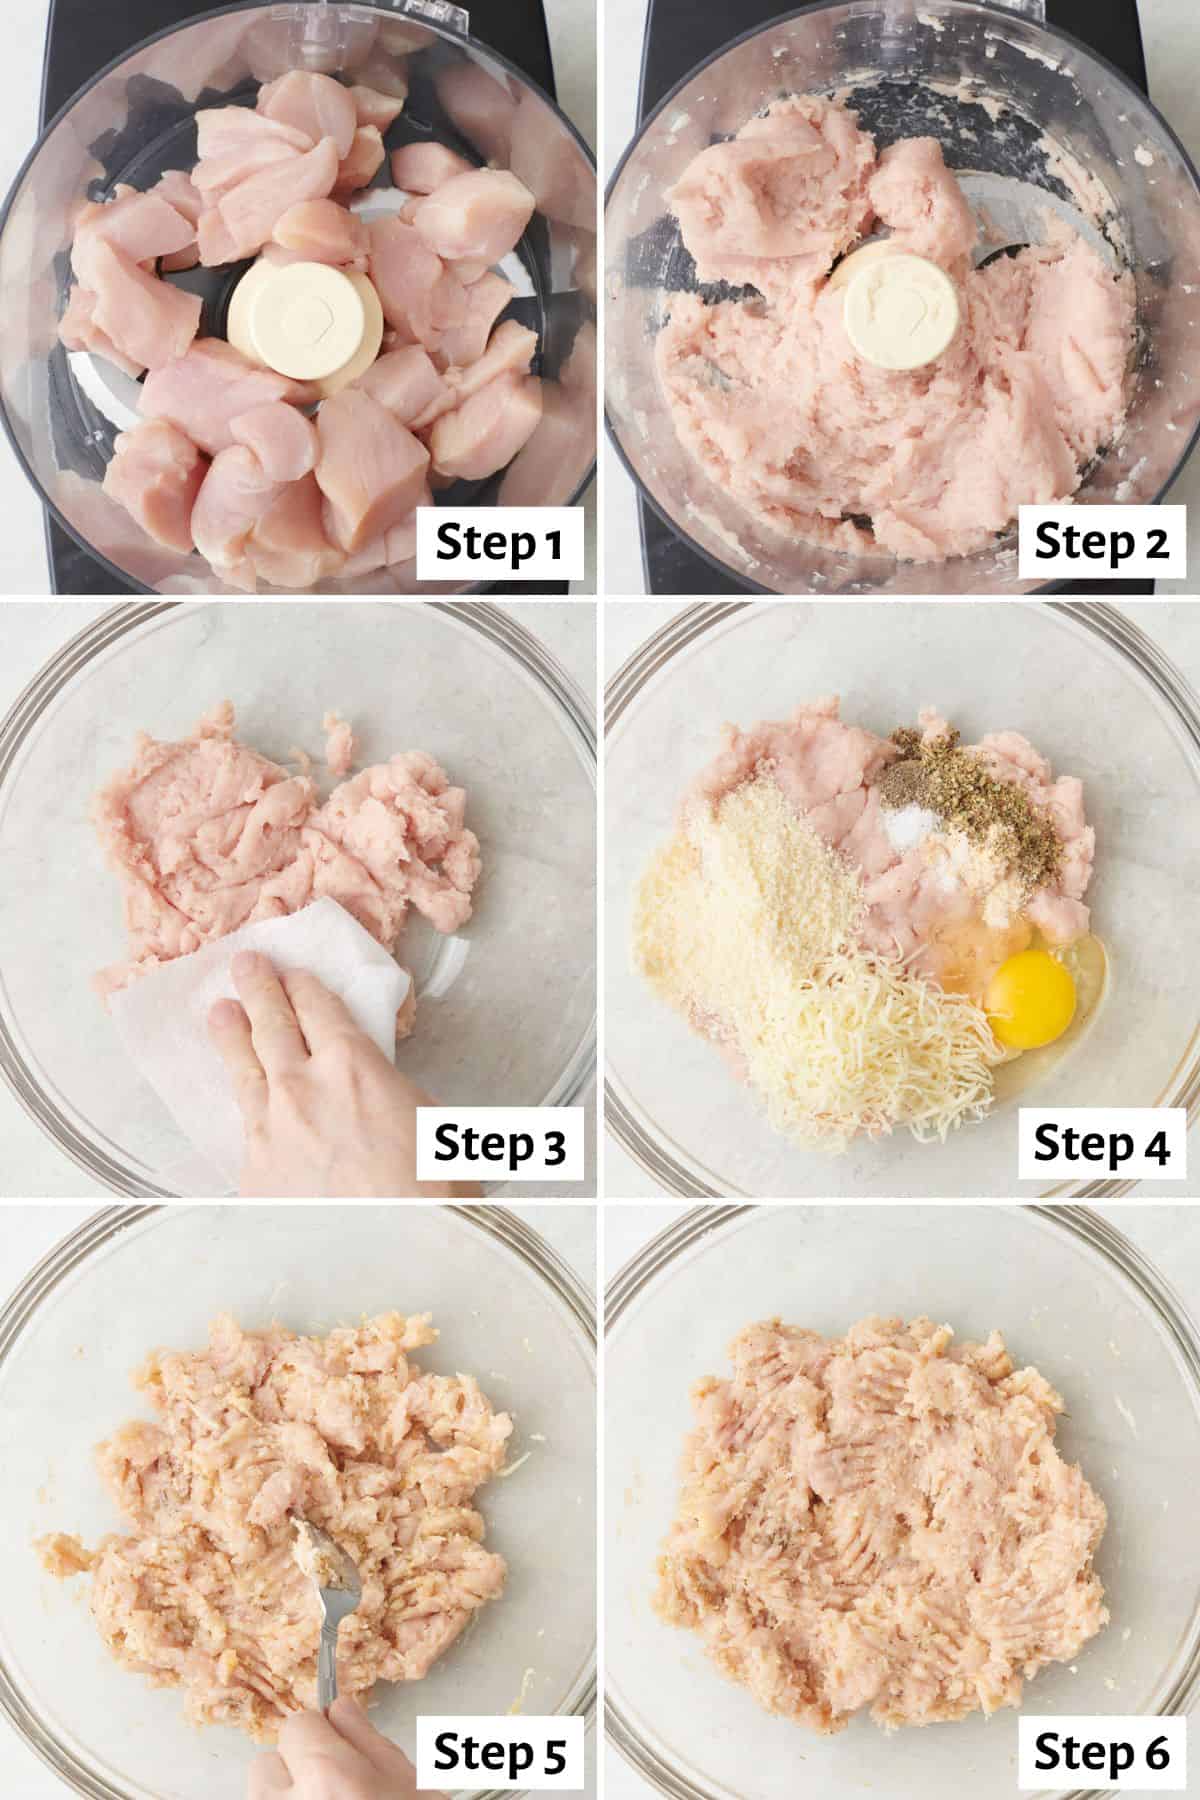 6 image collage preparing recipe: 1- chunks of chicken breasts in a food processor, 2- after processing, 3- processed chicken in a bowl, 4-egg, cheese, and seasoning added, 5- fork combining ingredients, 6- after combining.